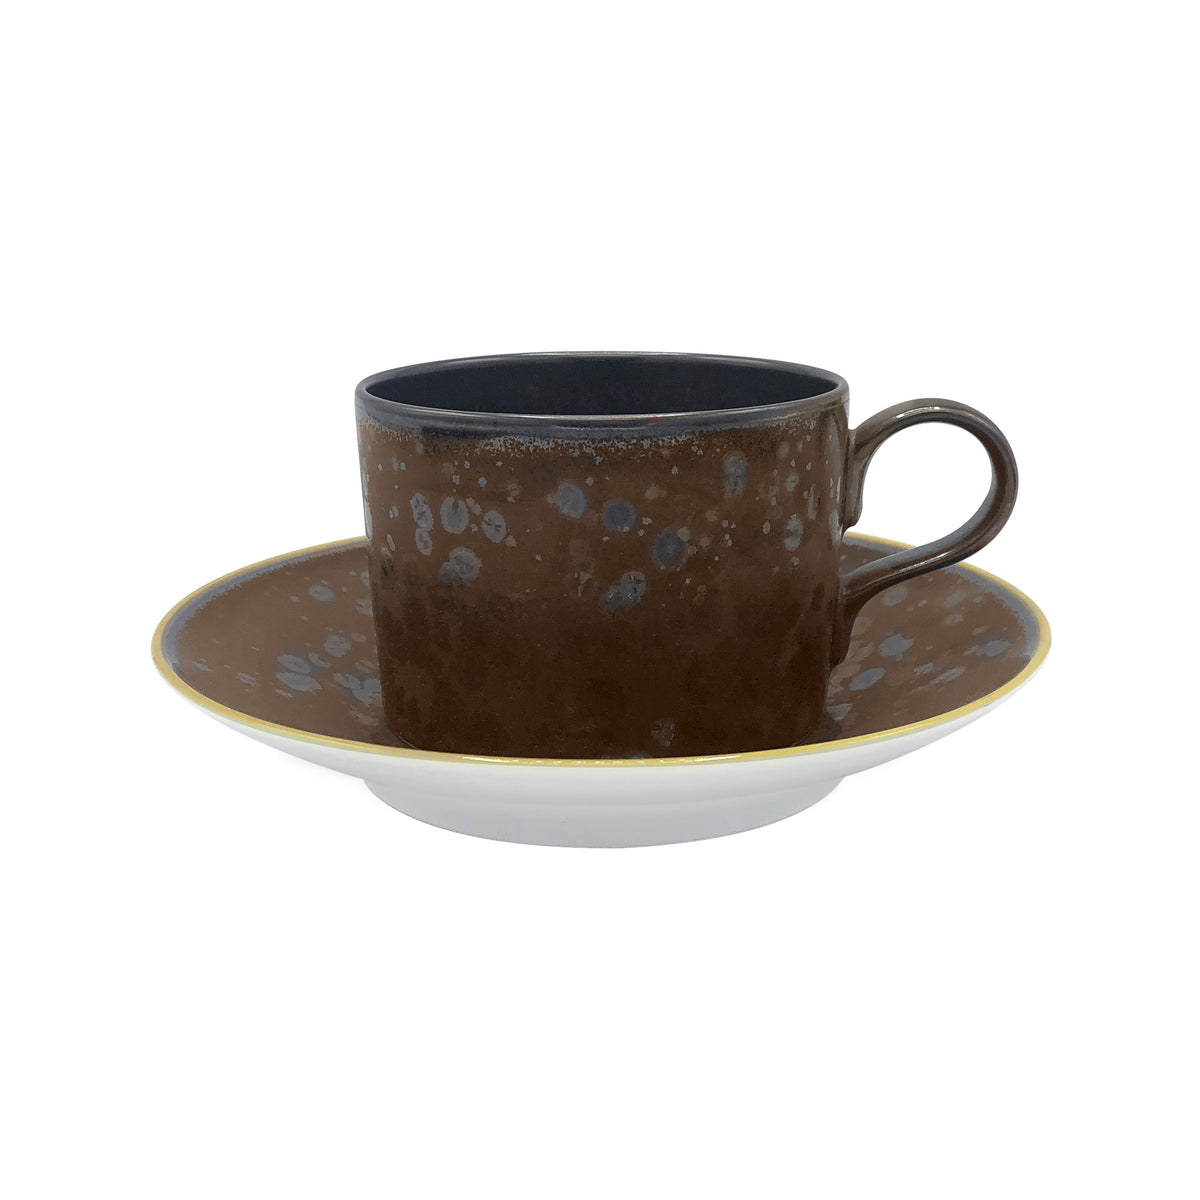 AGUIRRE - Breakfast set (cup & saucer)